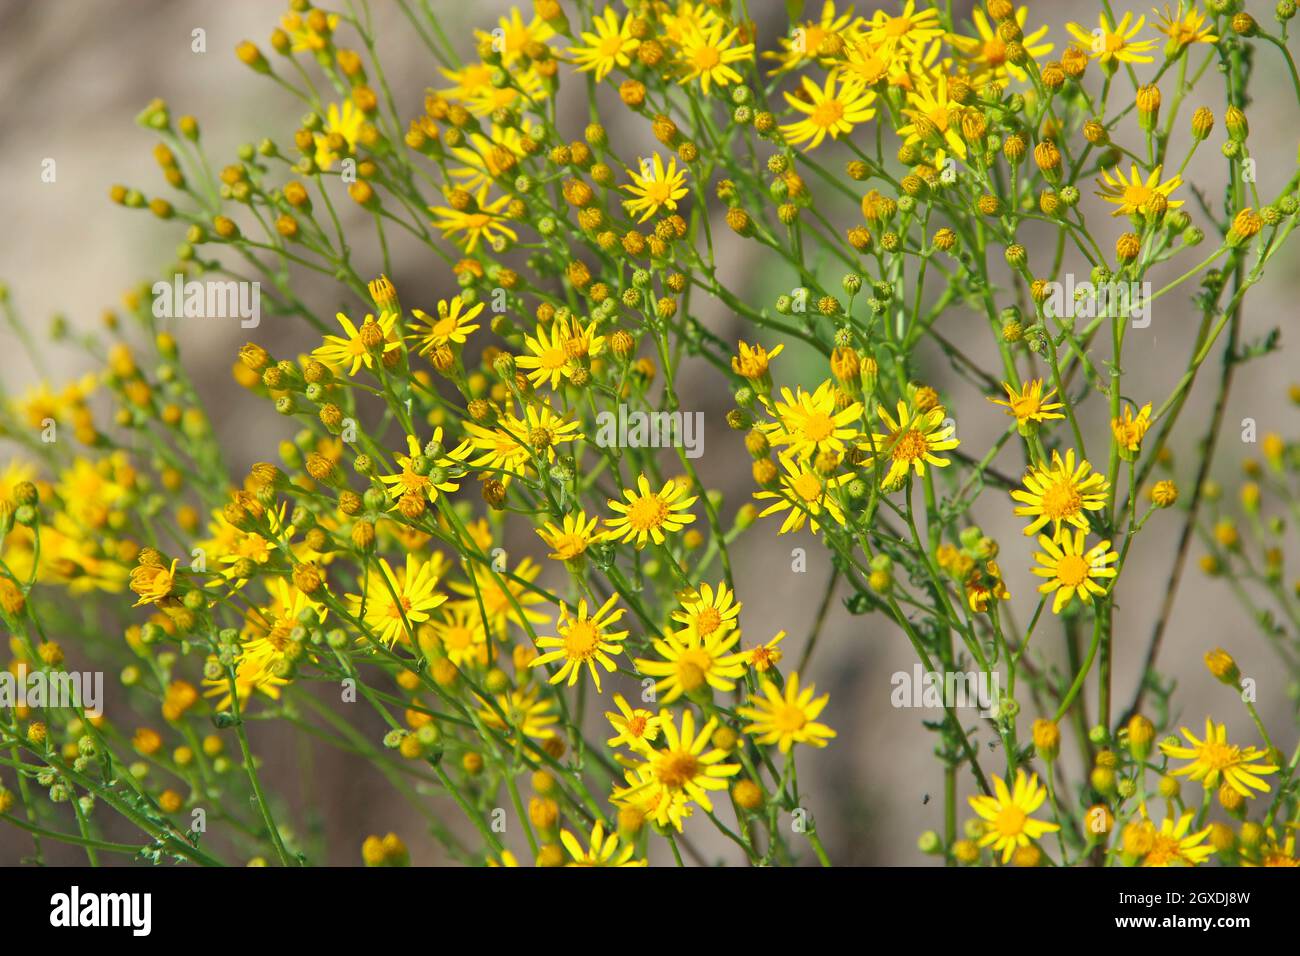 Flowers of Jacobaea vulgaris. Yellow flowers of Senico jacobaea blossoming in garden. Jacobaea vulgaris blooming in field. Butterfly of silver-studded Stock Photo